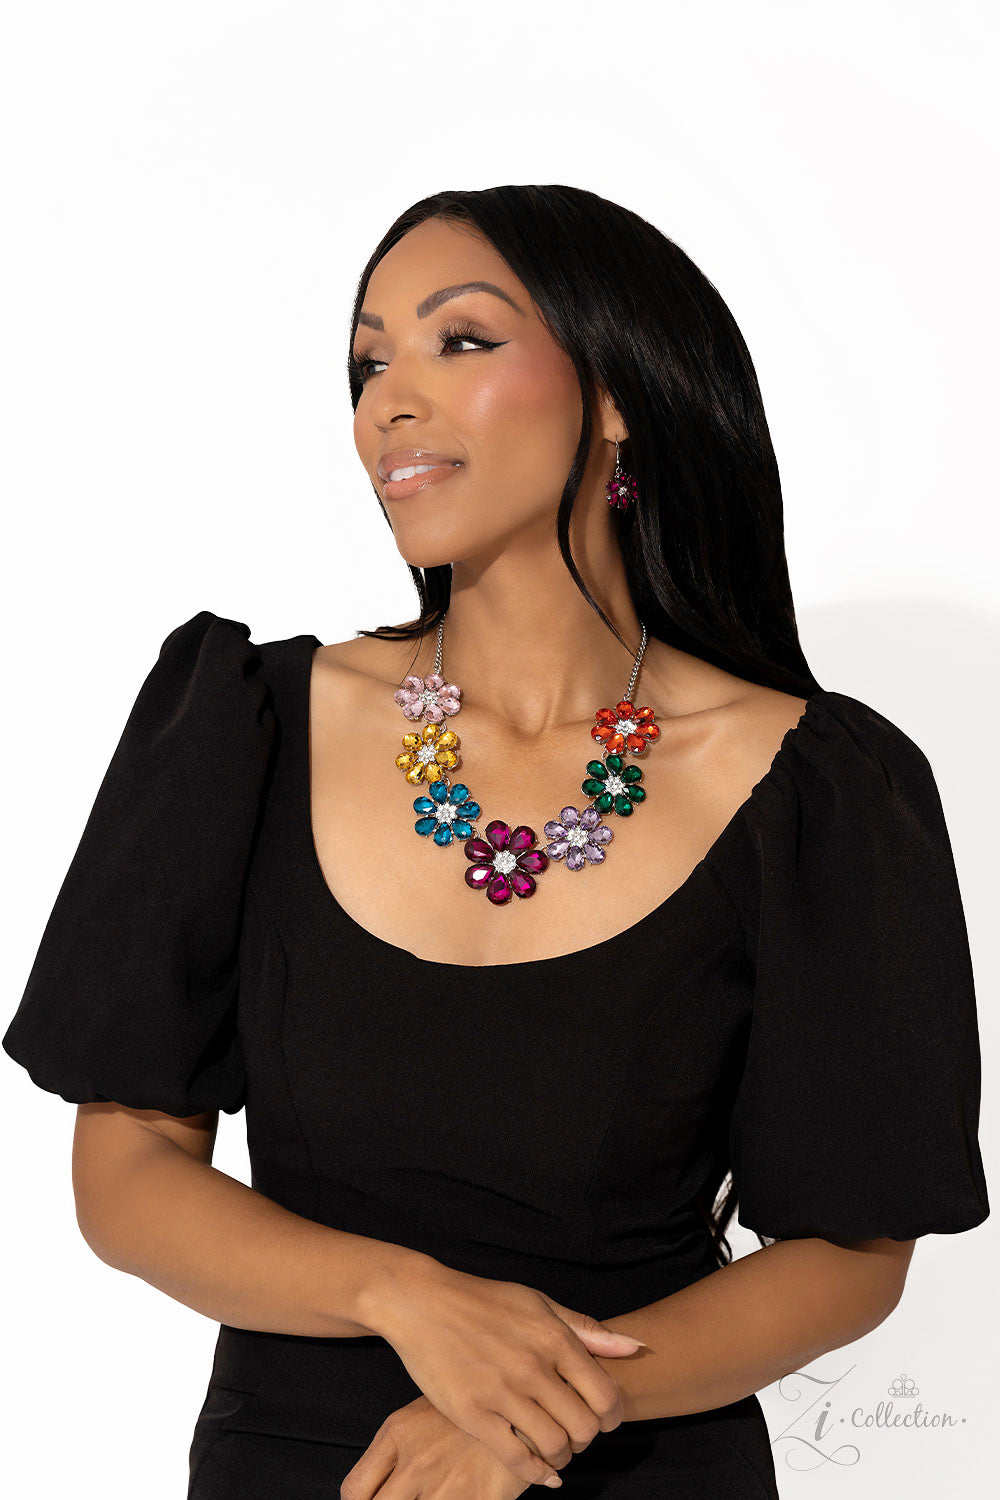 Outgoing Multi Flower 2023 Zi Collection Necklace - Paparazzi Accessories  Colorful teardrop-shaped petals fan out around clusters of corrugated sparkle, blossoming into an enchanted kaleidoscope. The faceted surfaces of each petal add texture and depth, allowing the floral frames to pop with 3D detail and further highlight the spectrum of color at play. Features an adjustable clasp closure.